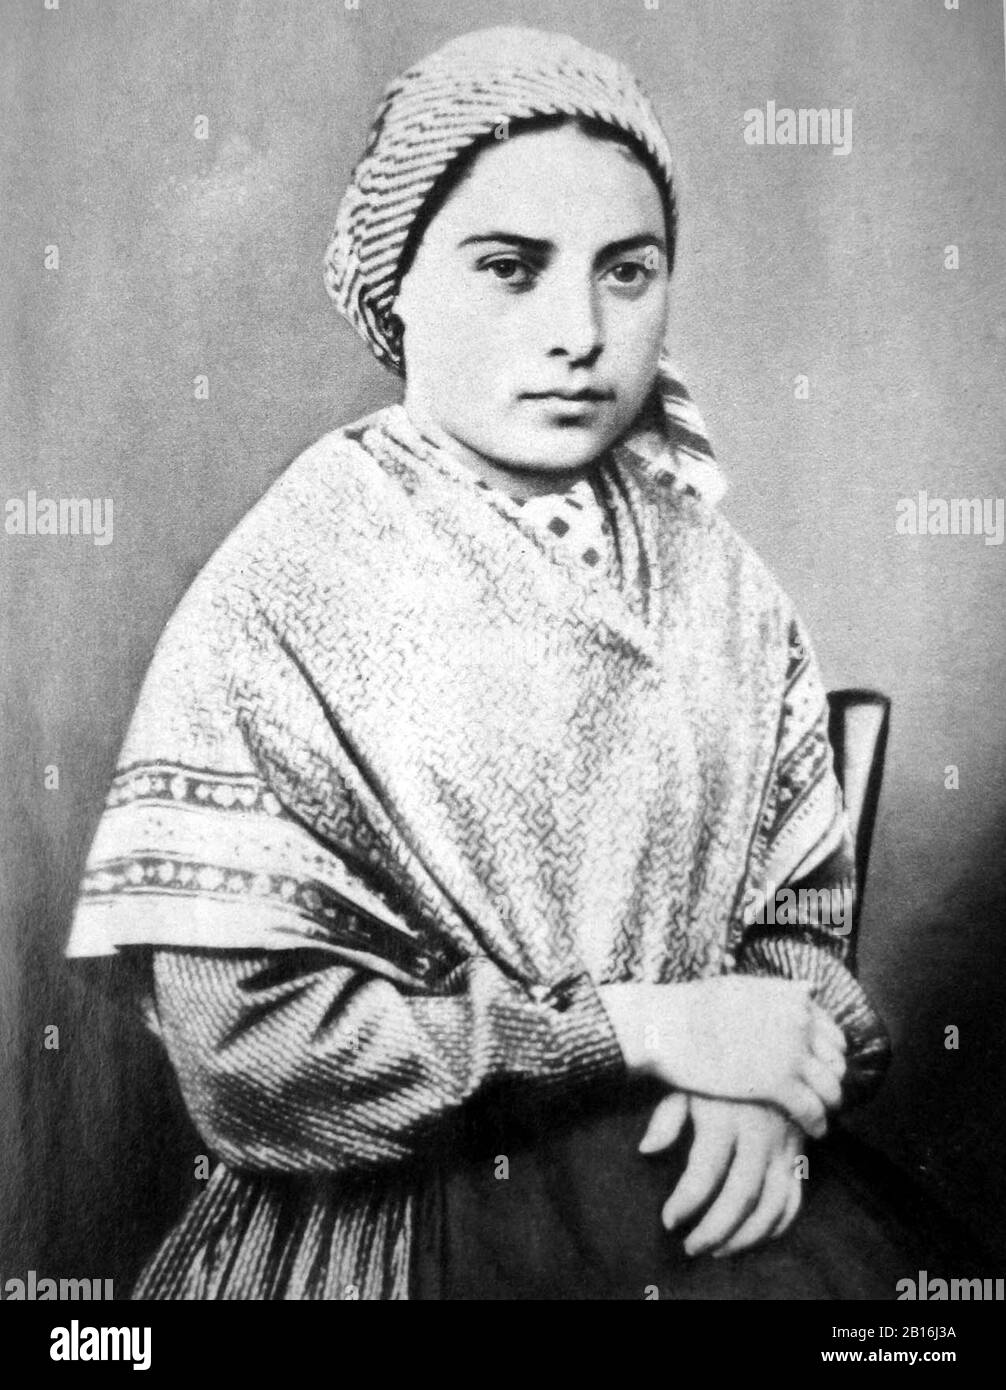 Saint Bernadette Soubirous (1844 – 1879), Saint Bernadette of Lourdes, was the firstborn daughter of a miller from Lourdes (Lorda in Occitan), in the department of Hautes-Pyrénées in France, and is best known for experiencing Marian apparitions of a 'young lady' who asked for a chapel to be built at the nearby cave-grotto at Massabielle. Stock Photo